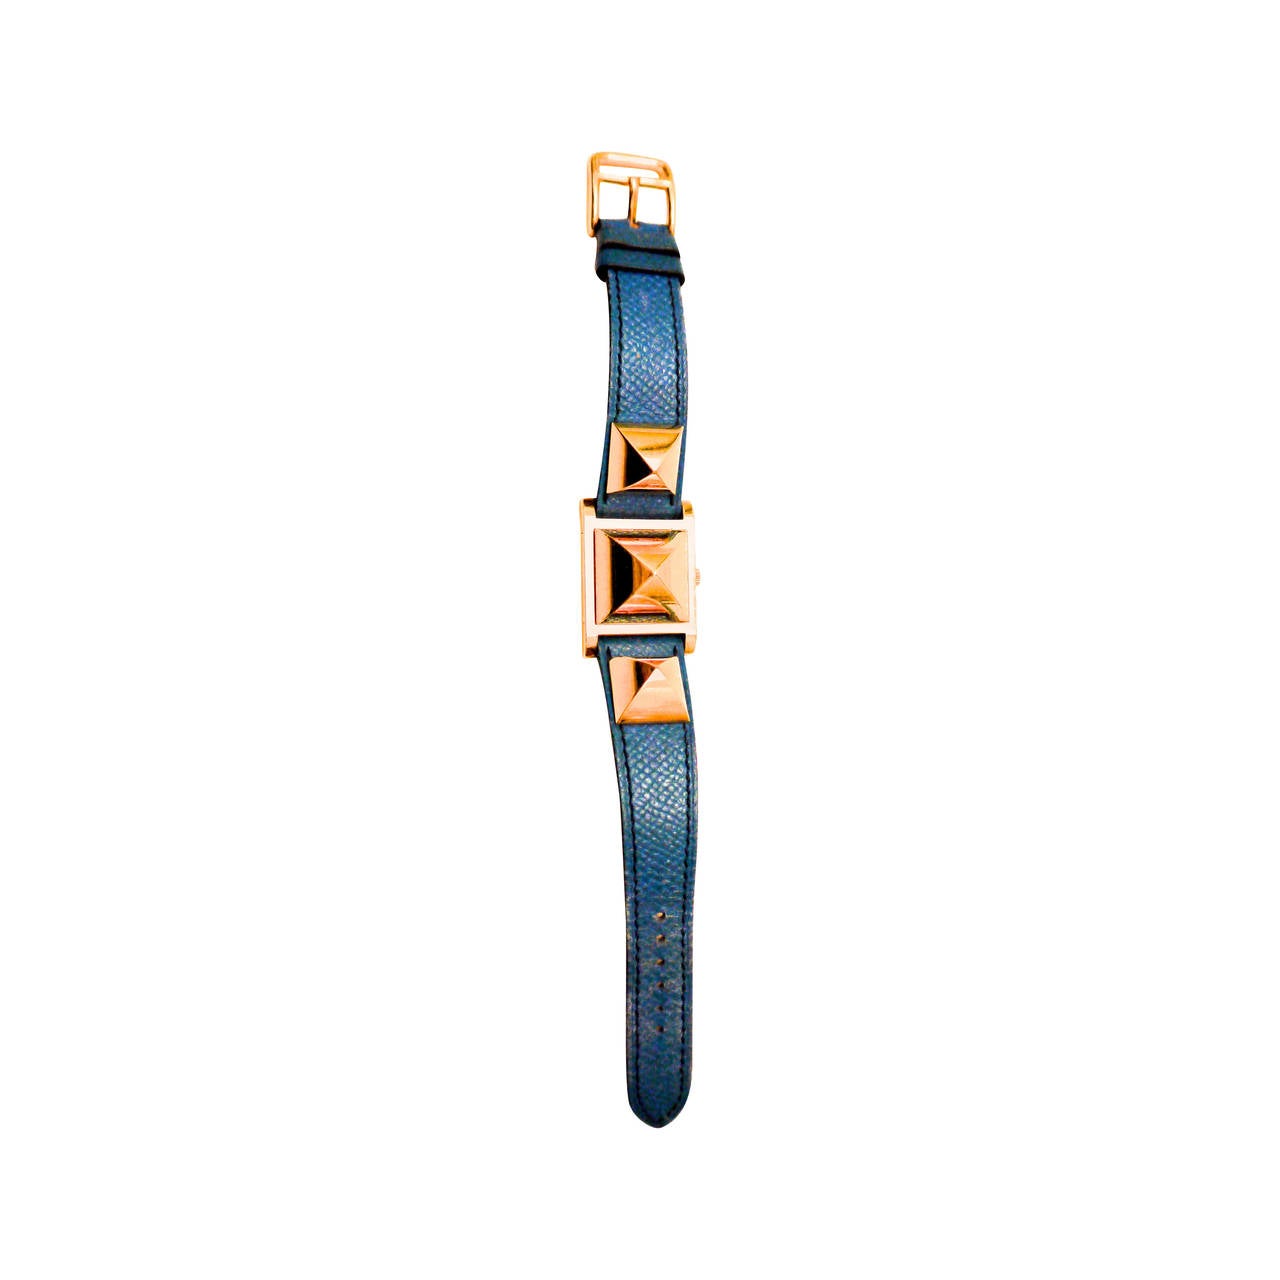 Hermes Medor Wrist Watch - Blue Strap with Gold Tone Hardware